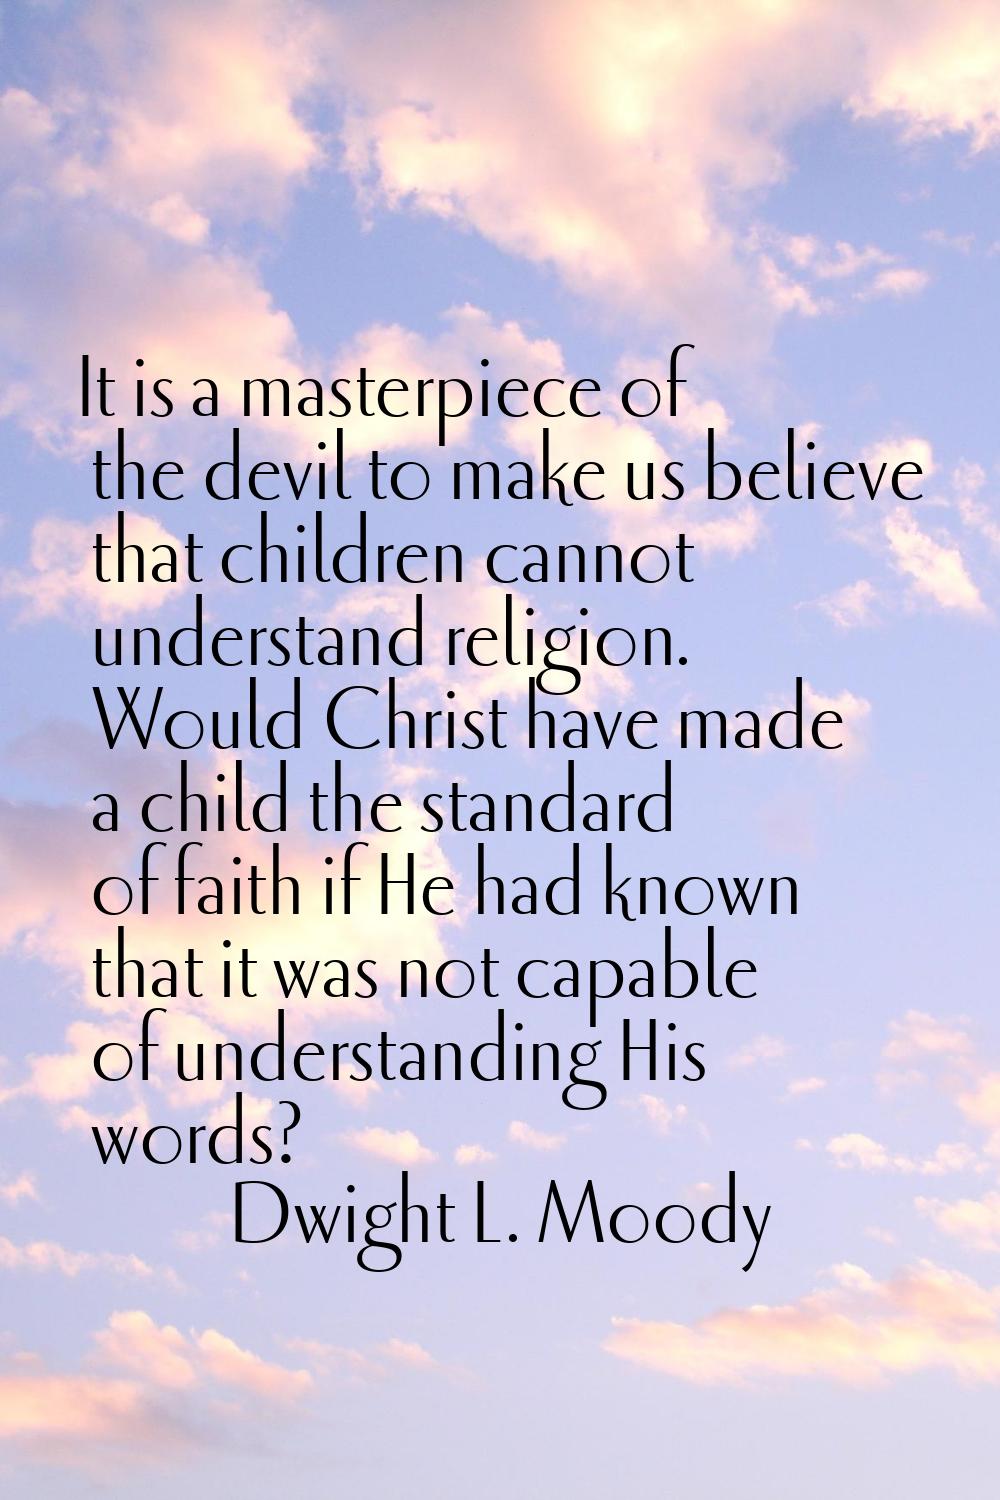 It is a masterpiece of the devil to make us believe that children cannot understand religion. Would